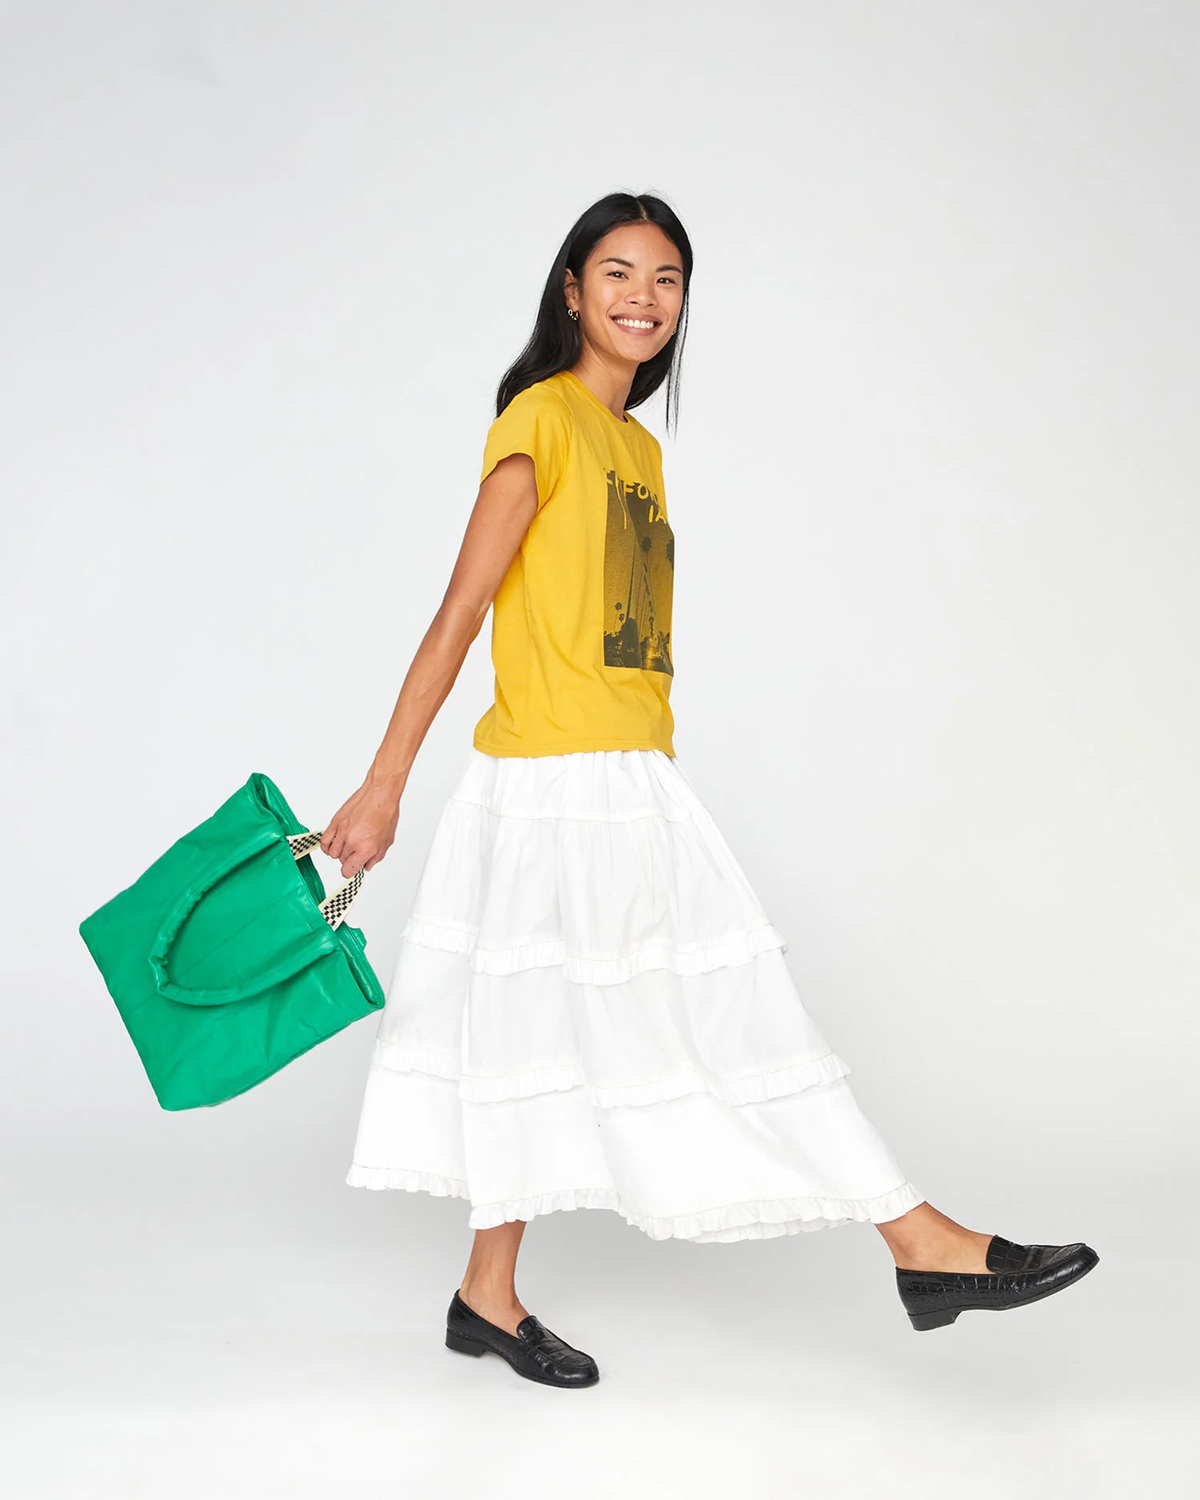 Travailler Magazine Tote in Green Nouvelle Look by Clare V.